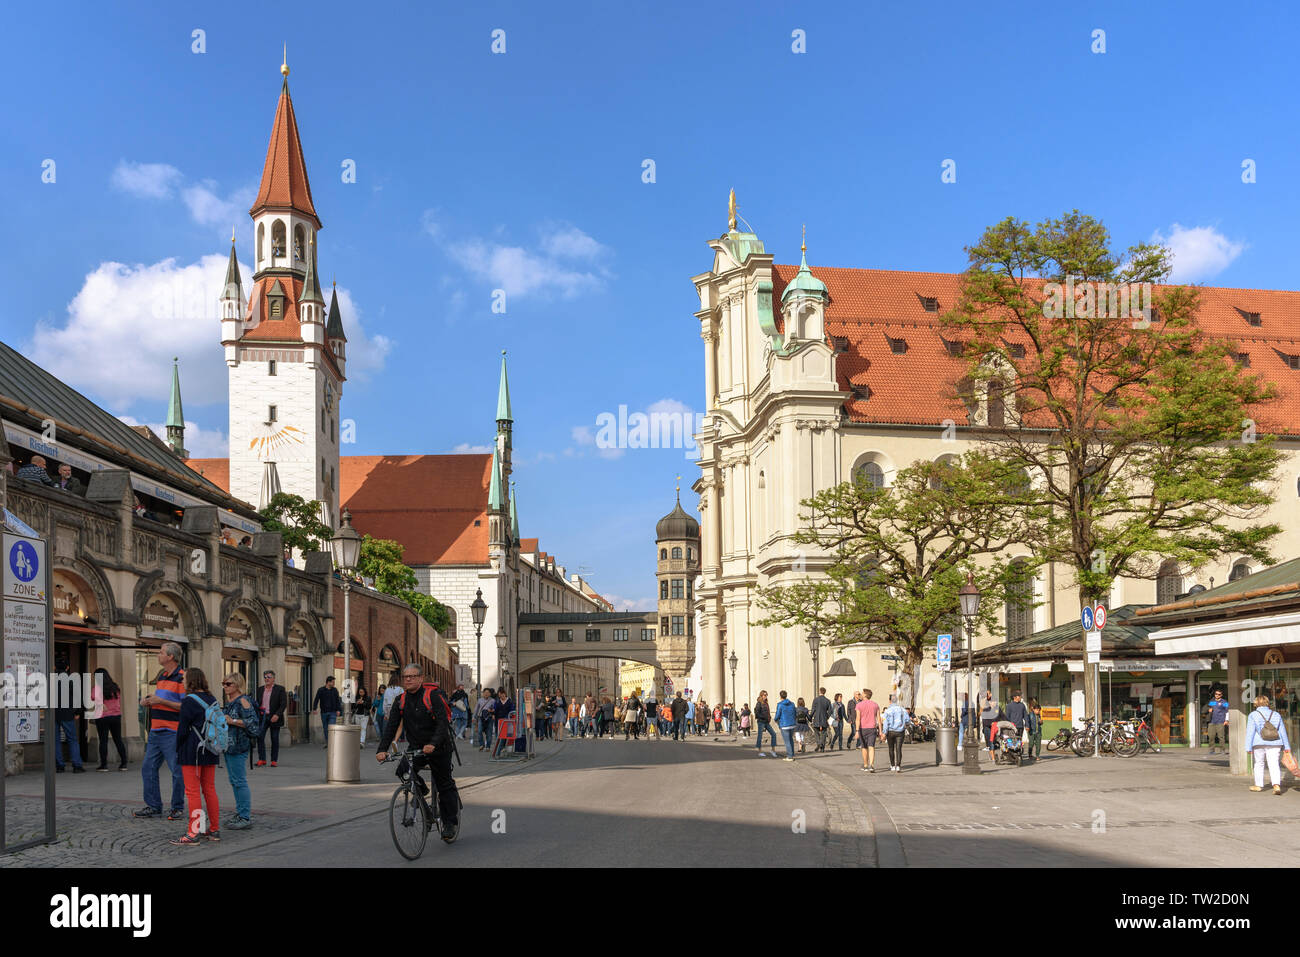 The Old Town Hall and Holy Spirit Church as seen from the Victuals Market in Munich, Germany on a sunny spring day Stock Photo